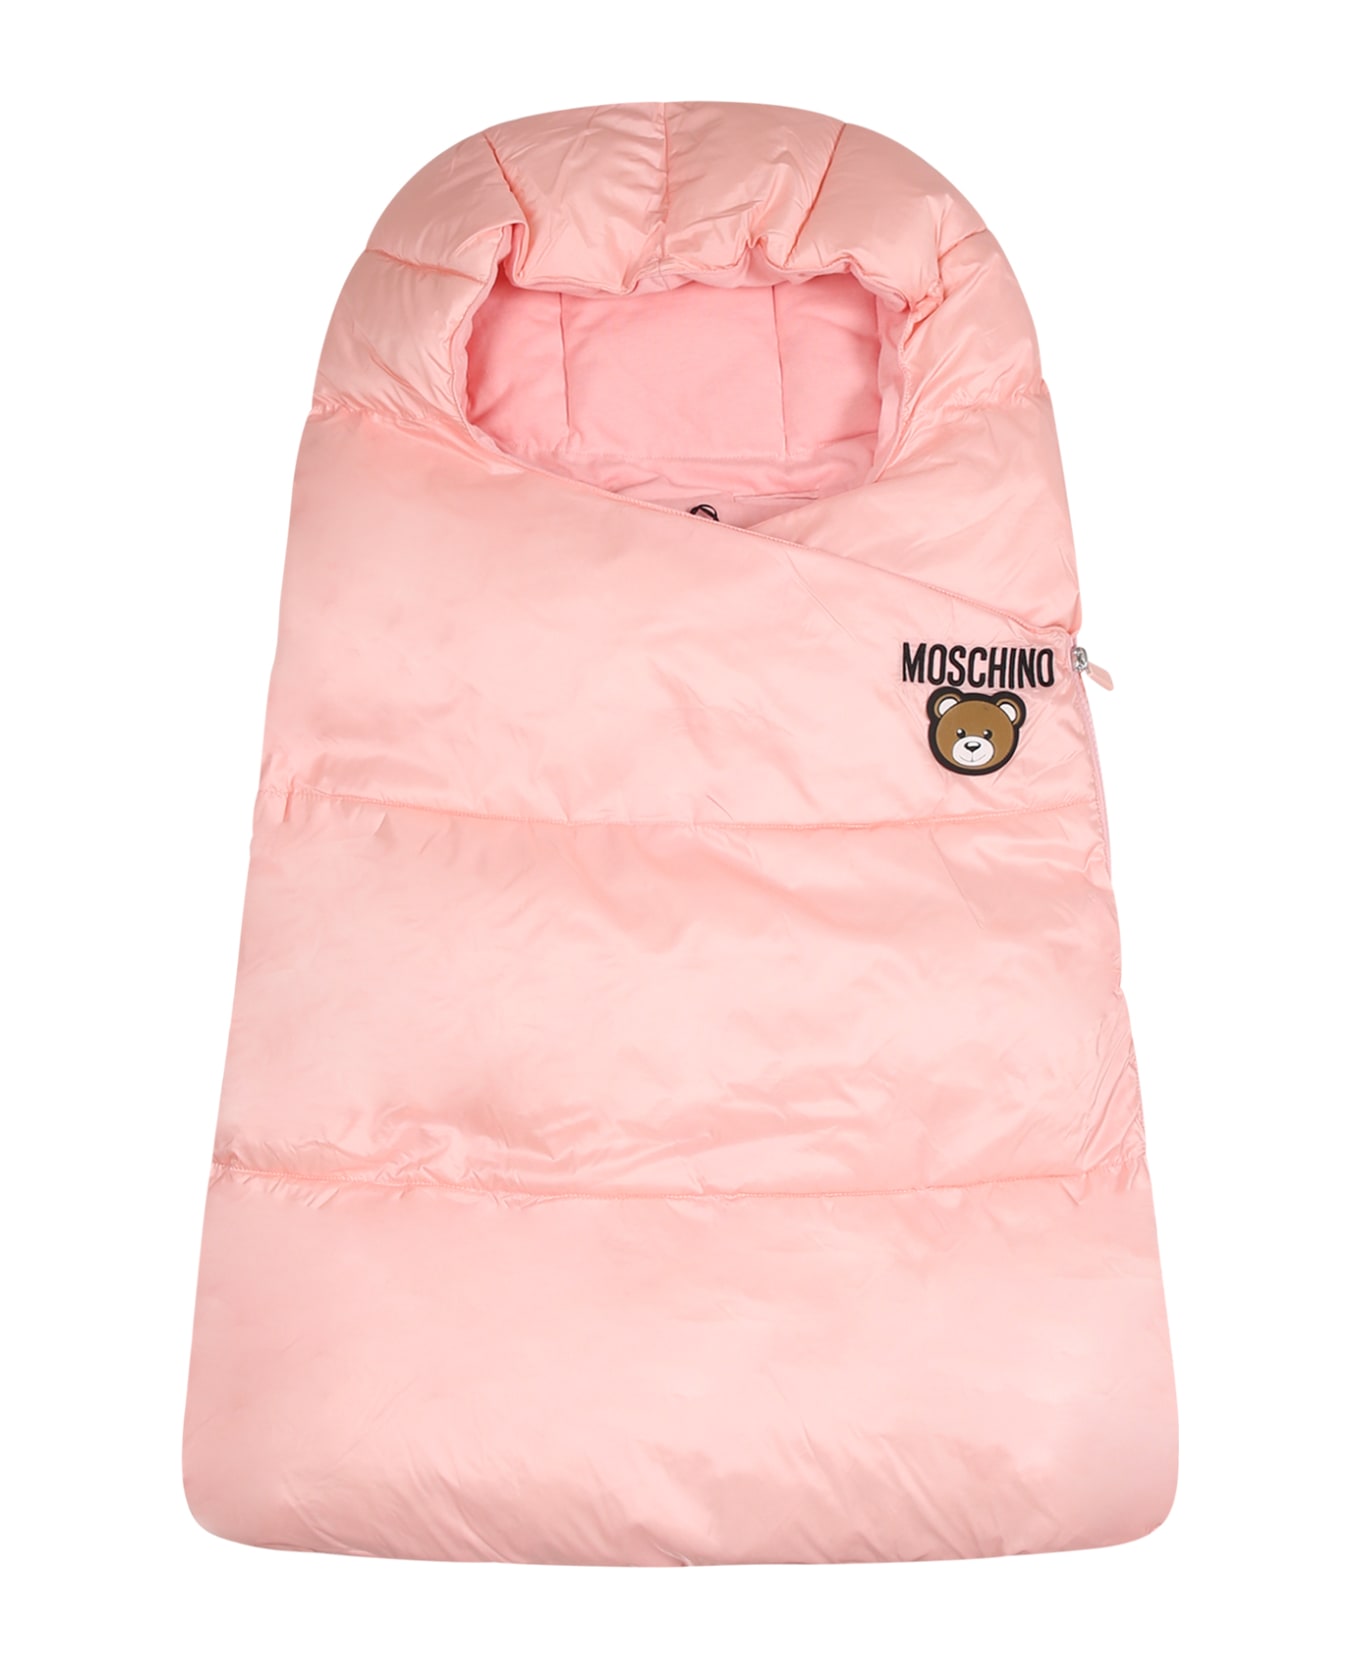 Moschino Pink Sleeping Bag For Baby Girl With Teddy Bear And Logo - Pink